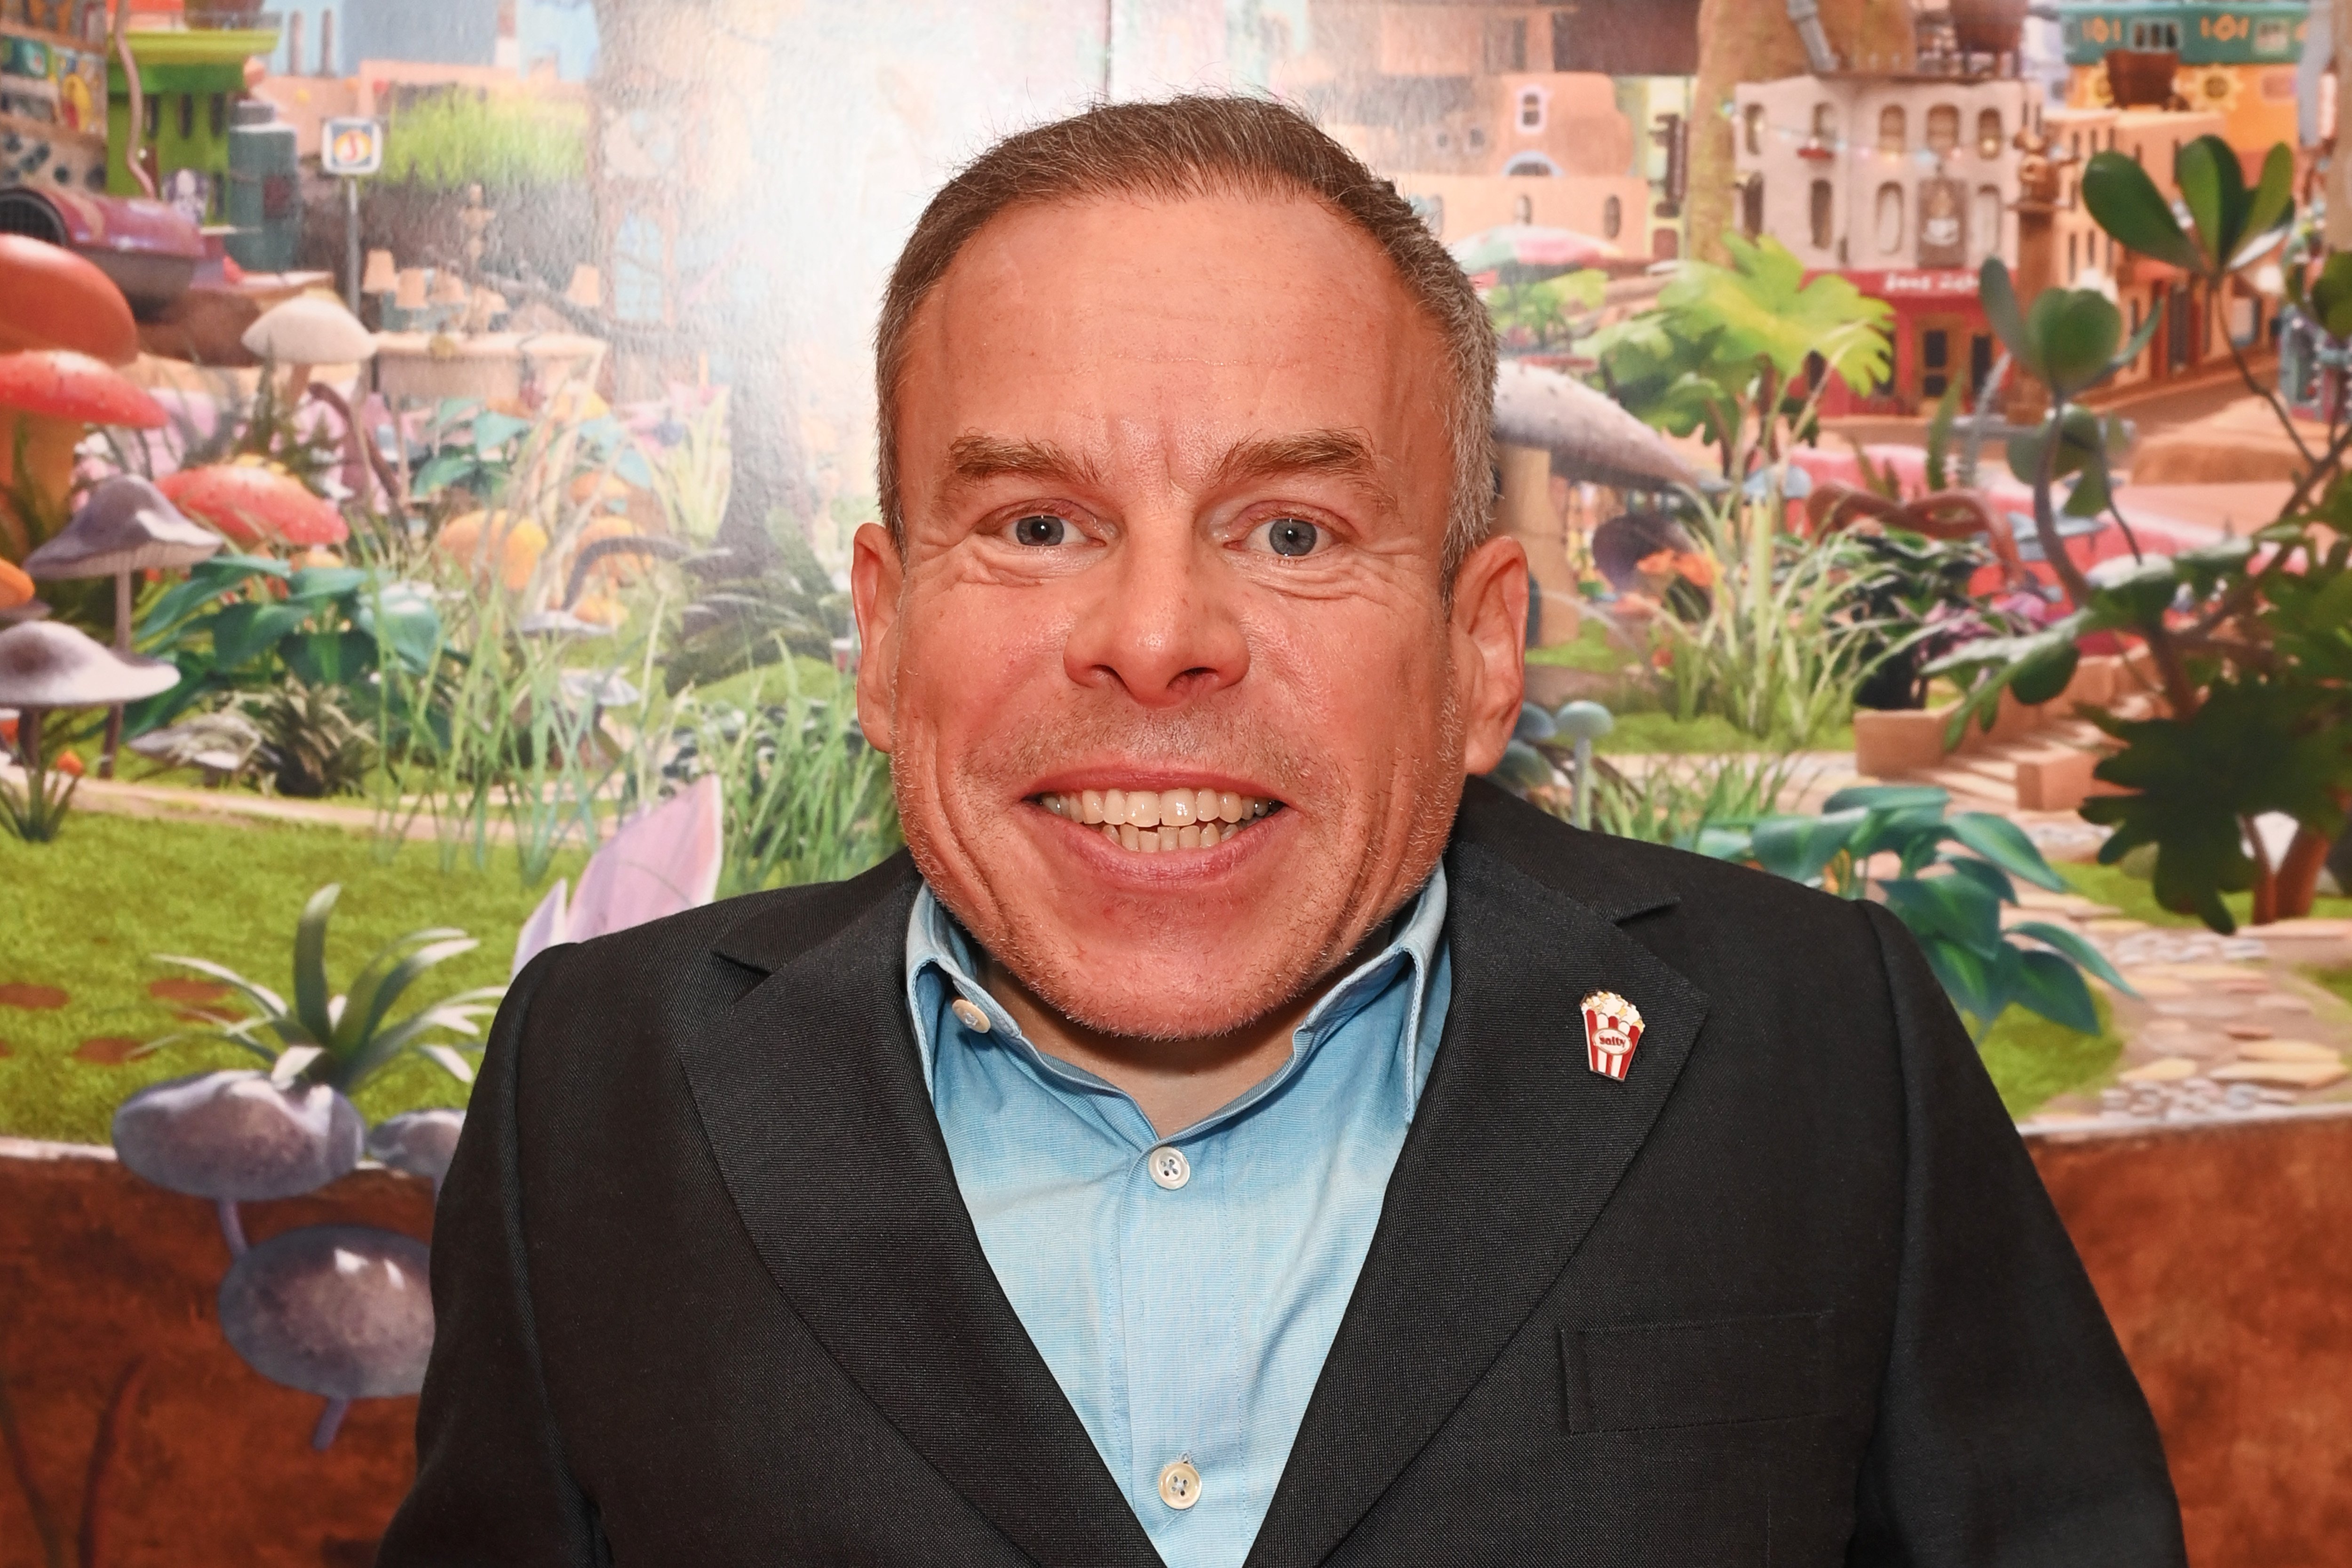 Warwick Davis attends the red carpet premiere of new animated children's series "Moley" at Odeon Luxe Leicester Square on September 25, 2021 in London, England. | Source: Getty Images